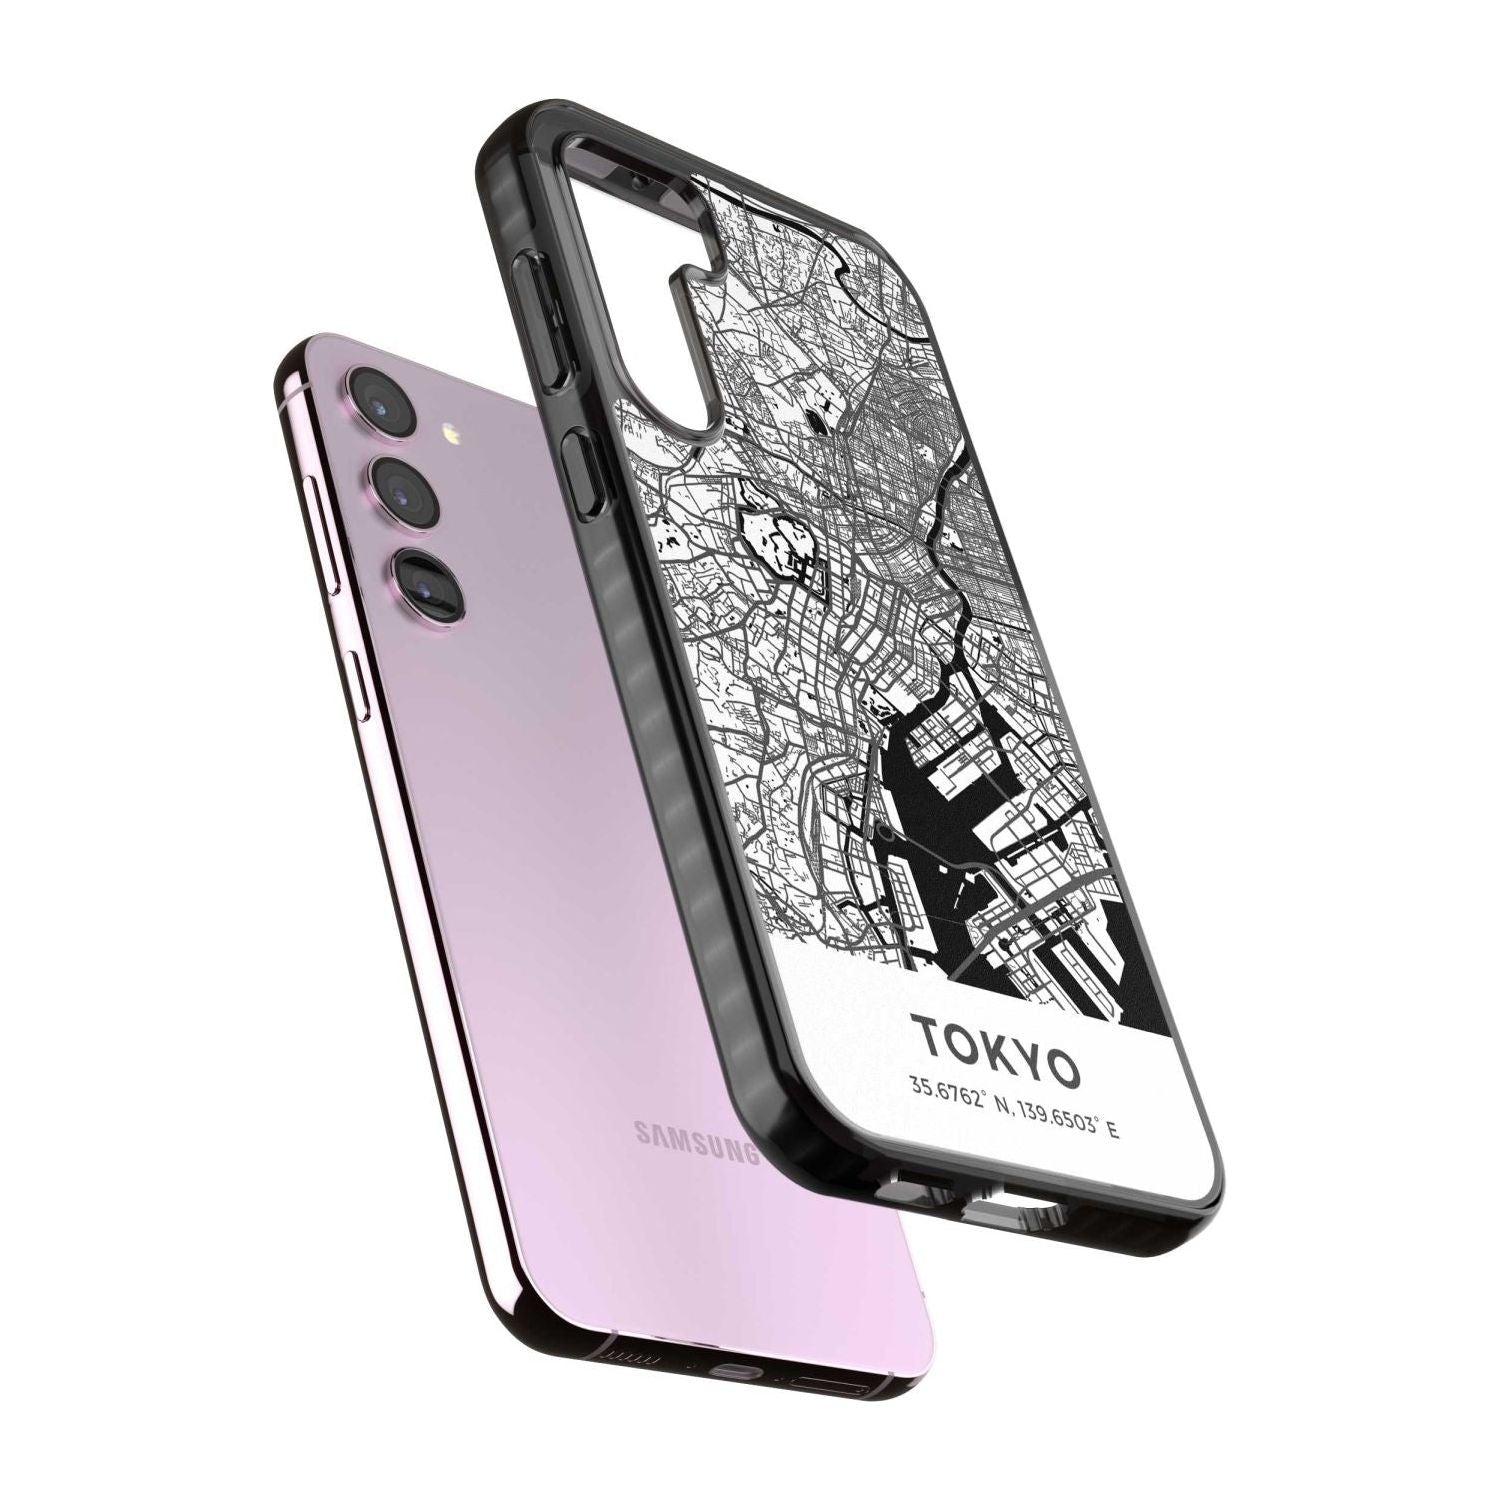 Map of Tokyo, Japan Phone Case iPhone 15 Pro Max / Black Impact Case,iPhone 15 Plus / Black Impact Case,iPhone 15 Pro / Black Impact Case,iPhone 15 / Black Impact Case,iPhone 15 Pro Max / Impact Case,iPhone 15 Plus / Impact Case,iPhone 15 Pro / Impact Case,iPhone 15 / Impact Case,iPhone 15 Pro Max / Magsafe Black Impact Case,iPhone 15 Plus / Magsafe Black Impact Case,iPhone 15 Pro / Magsafe Black Impact Case,iPhone 15 / Magsafe Black Impact Case,iPhone 14 Pro Max / Black Impact Case,iPhone 14 Plus / Black I